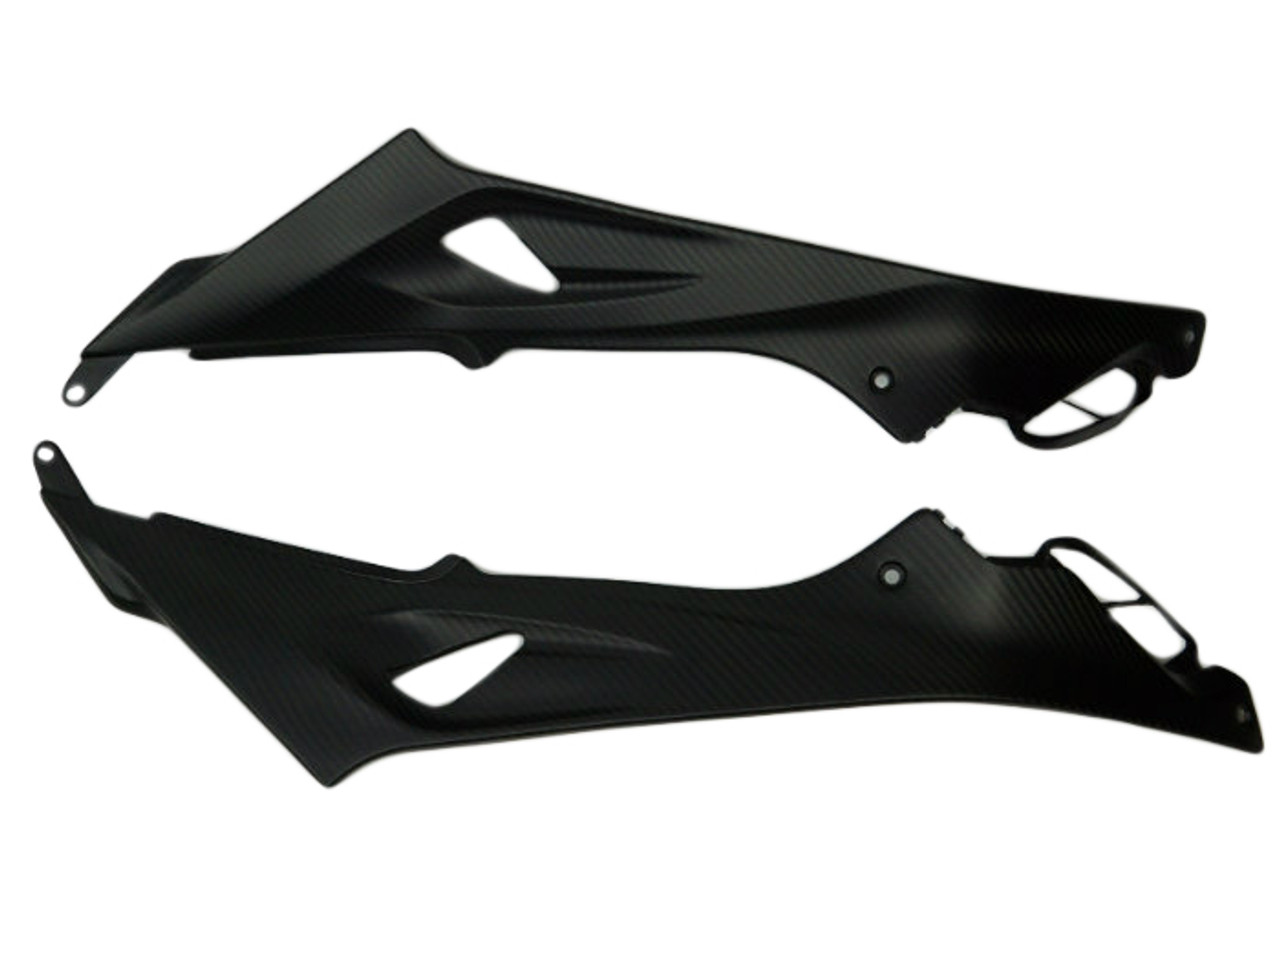 Tank Side Covers ( w/internal lugs) in 100% Carbon Fiber for BMW S1000R  2014-2021, S1000RR 2015-2018